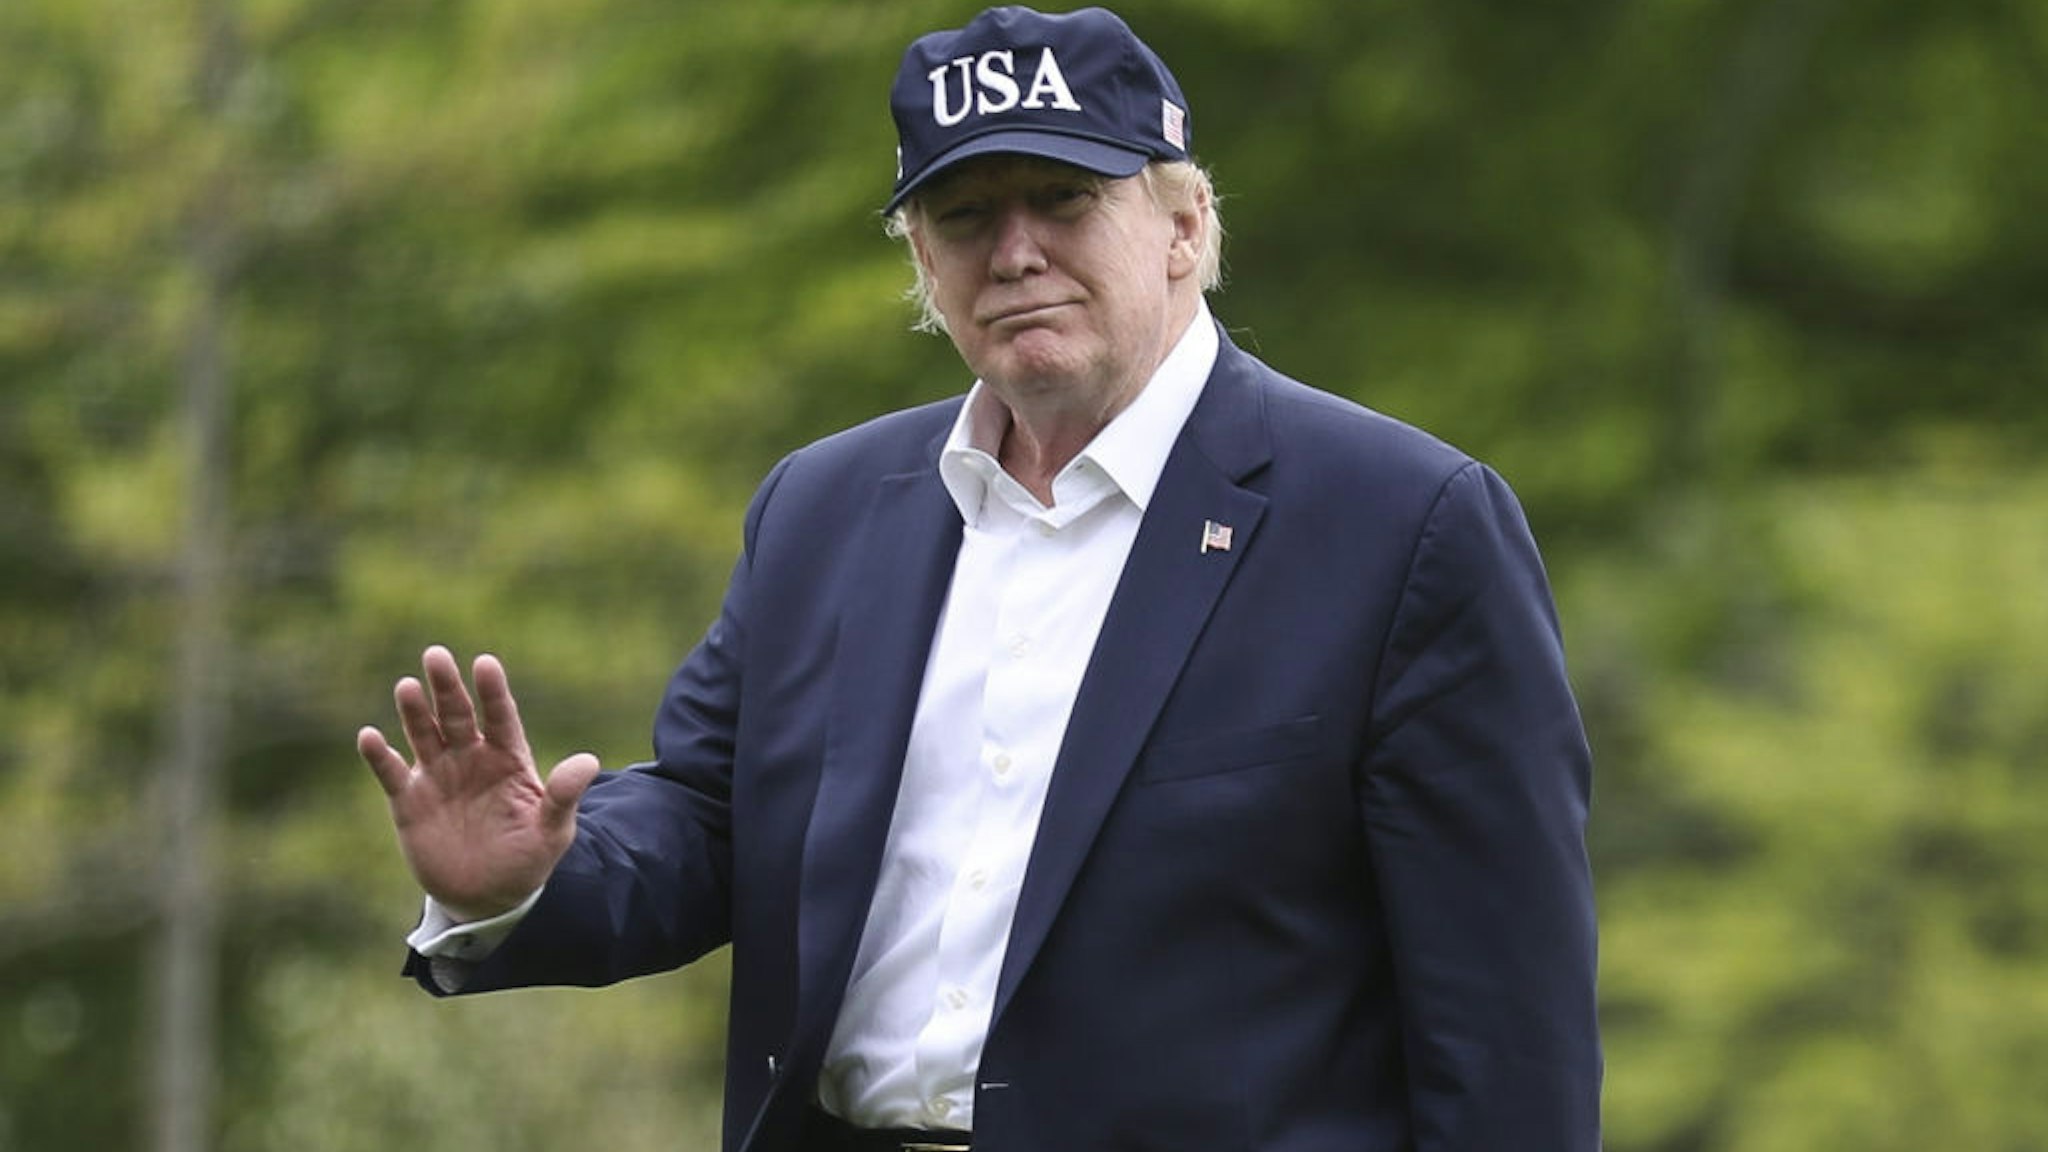 U.S. President Donald Trump waves while walking on the South Lawn of the White House after arriving in Washington, D.C., U.S., on Sunday, May 3, 2020. Trump will hold a symbolic town hall meeting at the Lincoln Memorial Sunday as he accelerates efforts to reopen America after weeks of stay-at-home measures taken to stem coronavirus spread have ravaged the economy. Photographer: Oliver Contreras/Sipa/Bloomberg